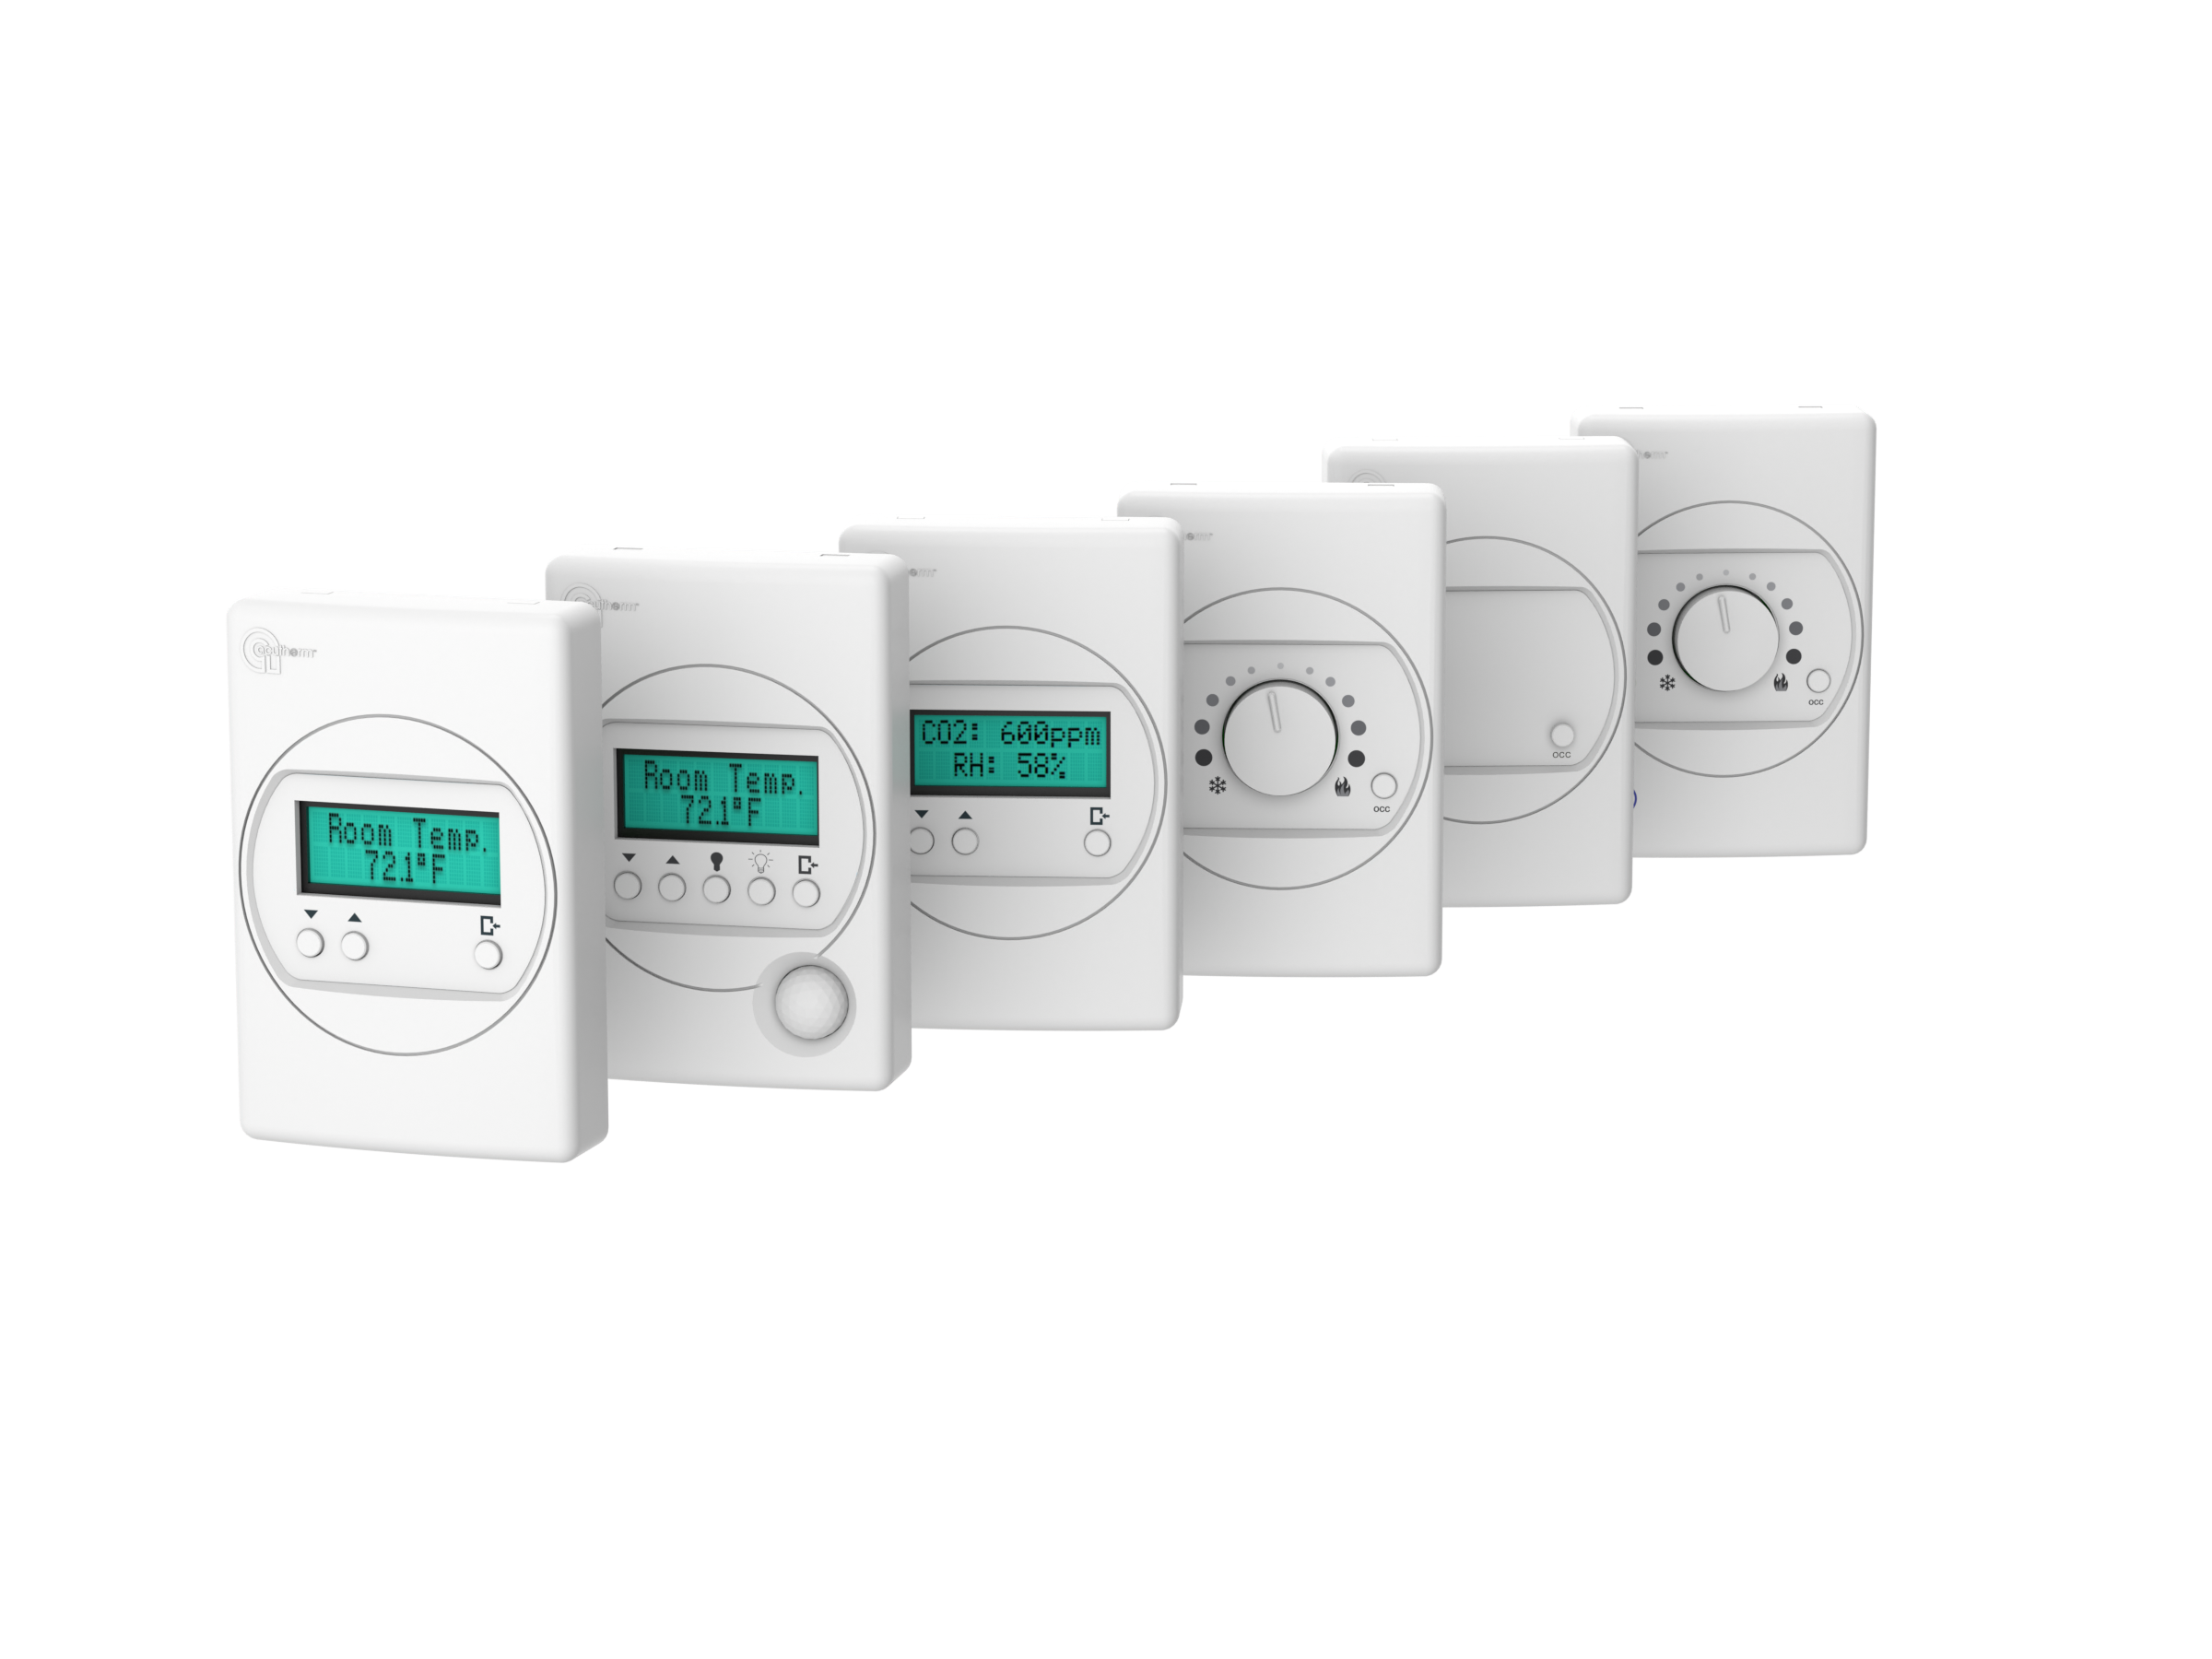 Acutherm Advantage thermostat and controls family image